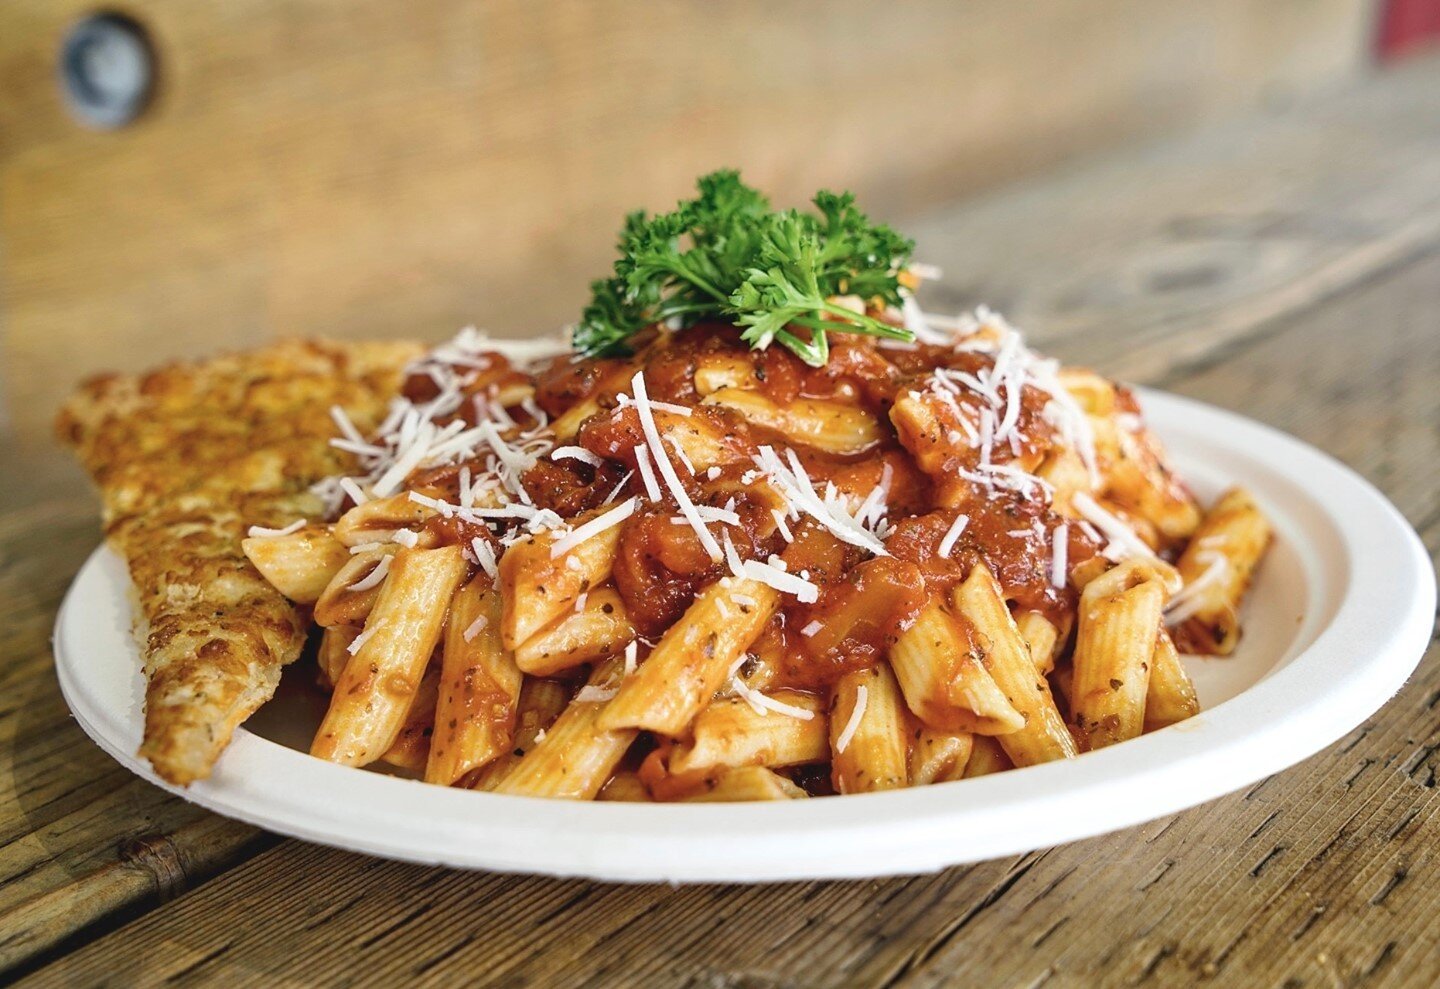 A true classic! Tomato Penne; tossed in our fresh tomato basil sauce. 🥰⁠
.⁠
.⁠
.⁠
#GranvilleIsland #GravilleIslandMarket #GranvilleIslandPublicMarket #VancouverPasta #VancouverItalianFood #FreshFood #Pasta #Penne #TomatoPenne #Cheesy #TomatoBasil #P